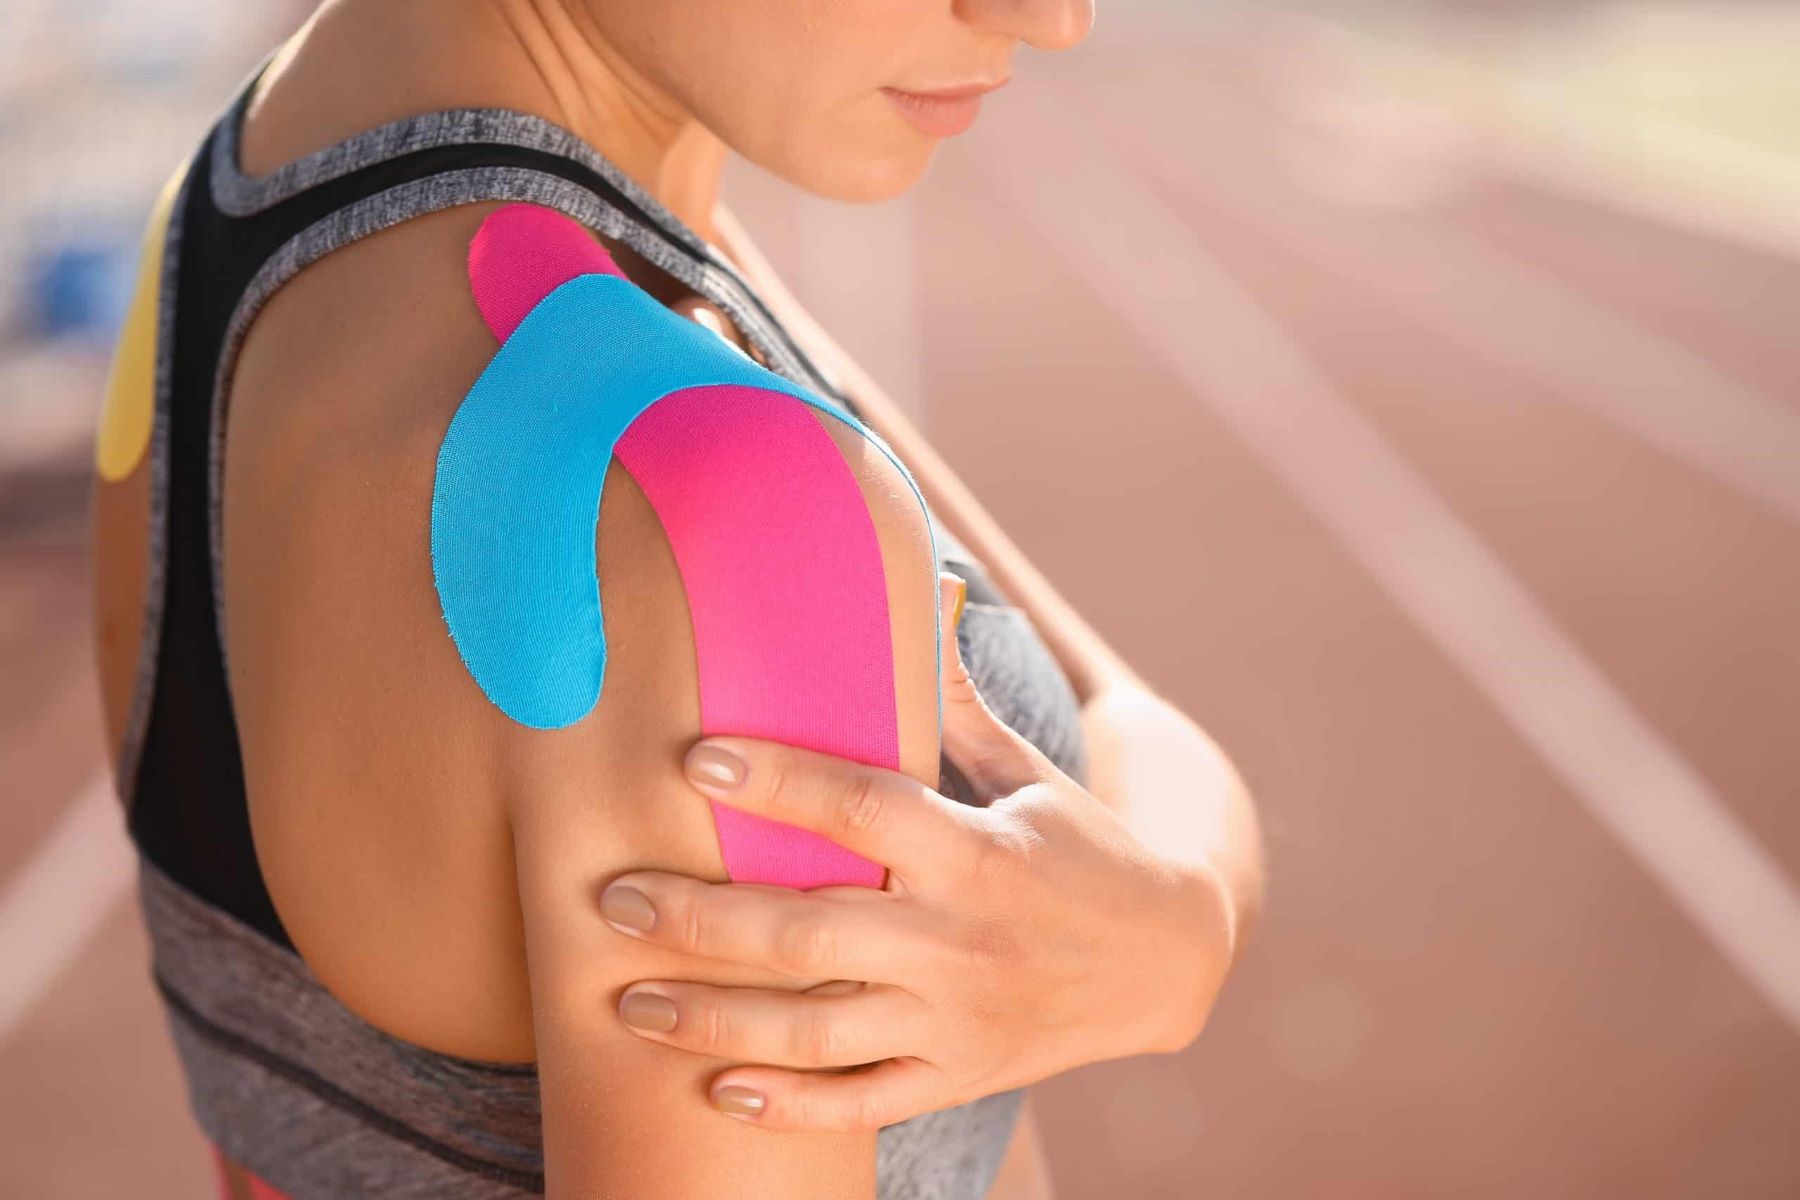 How To Use KT Tape For Shoulder Pain Relief